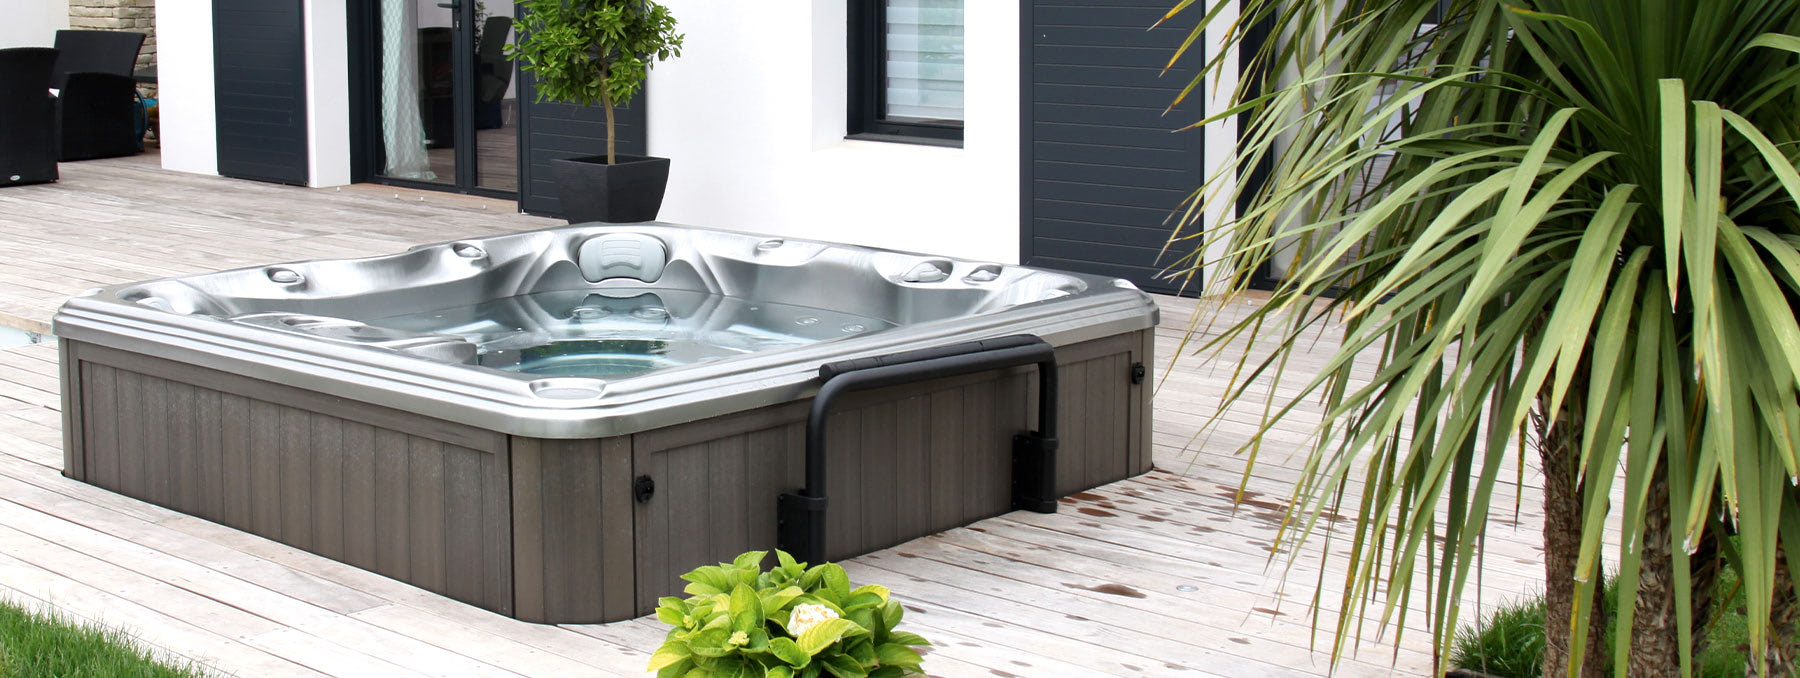 Do you sell salt water hot tubs?